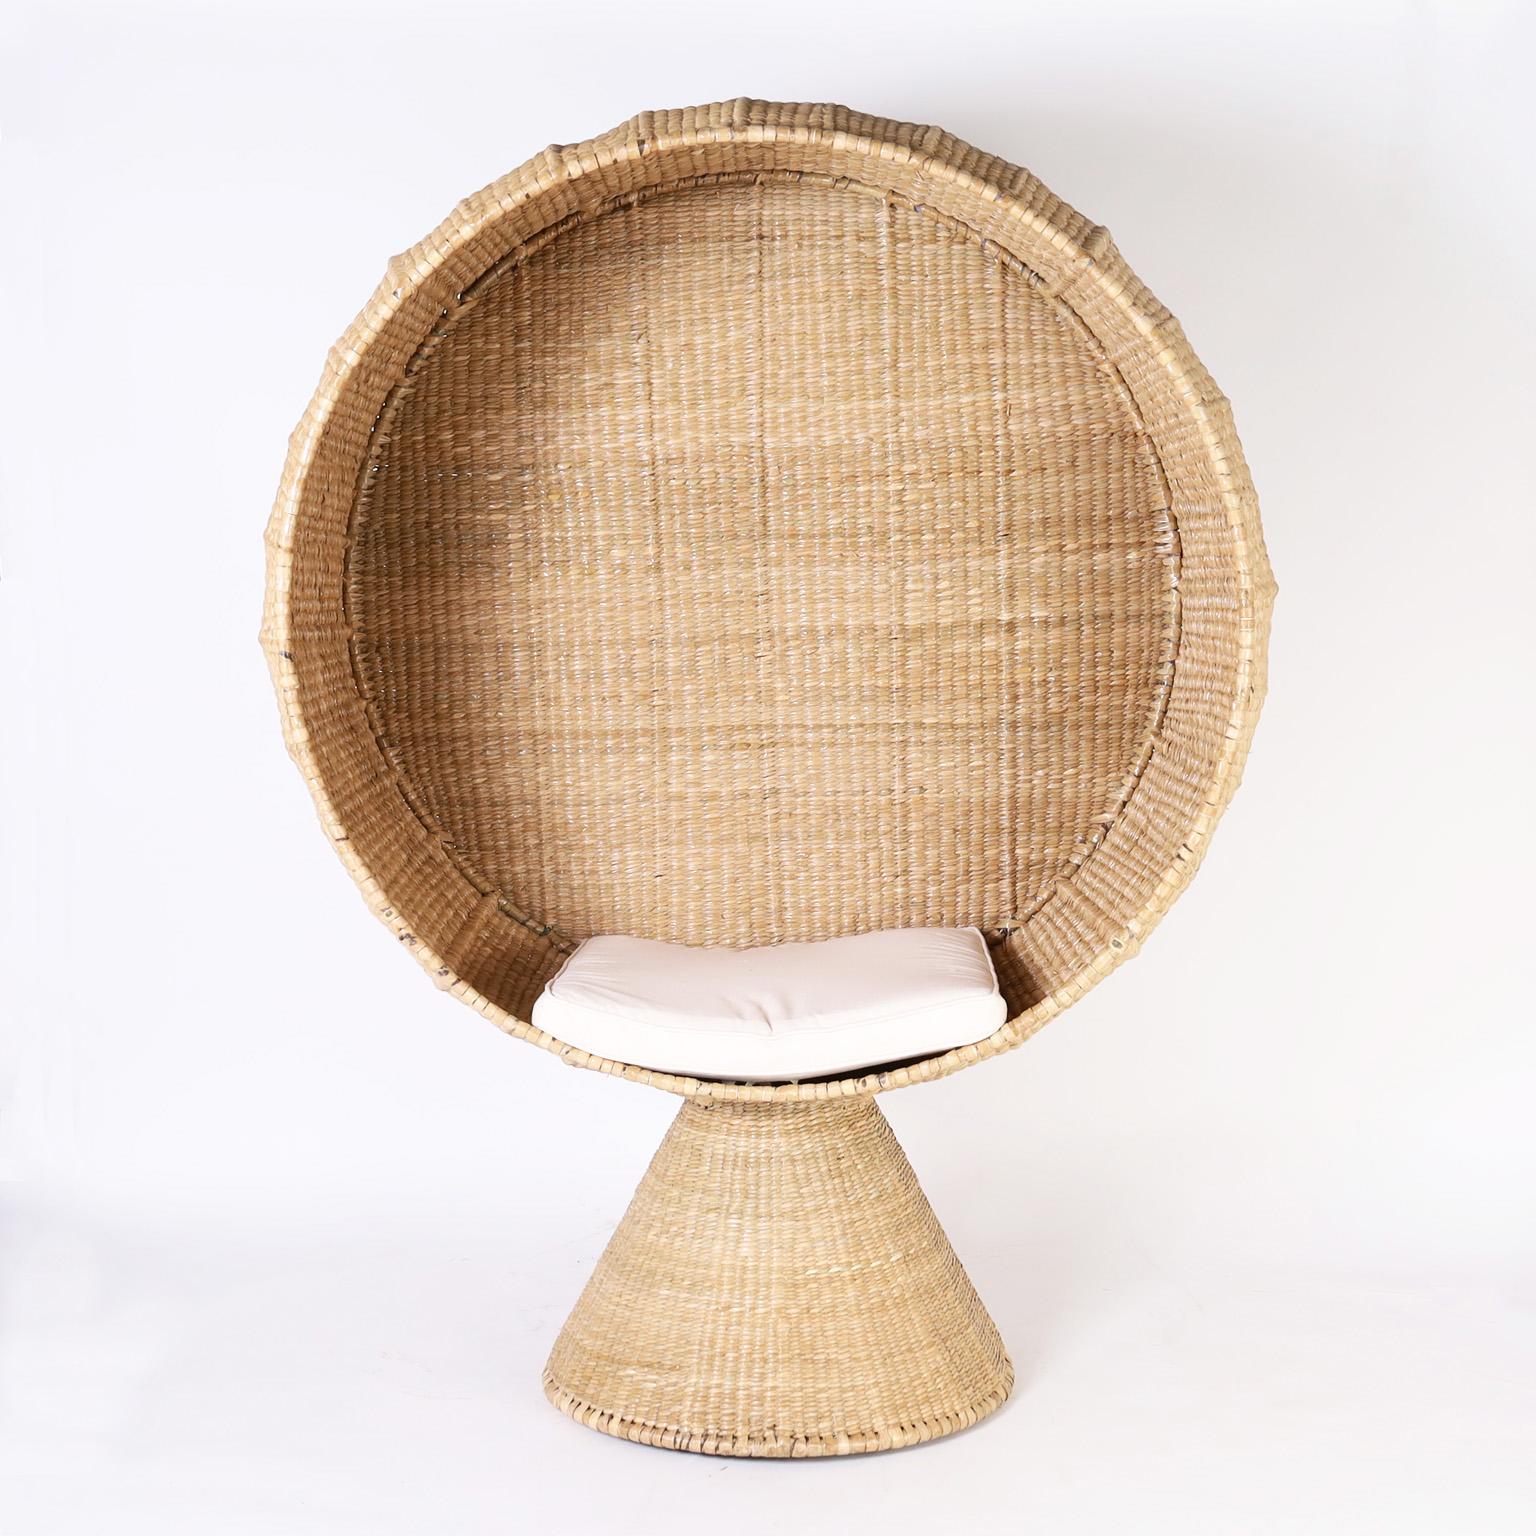 Mexican Large Scale Wicker Chairs from the FS Flores Collection, Priced Individually